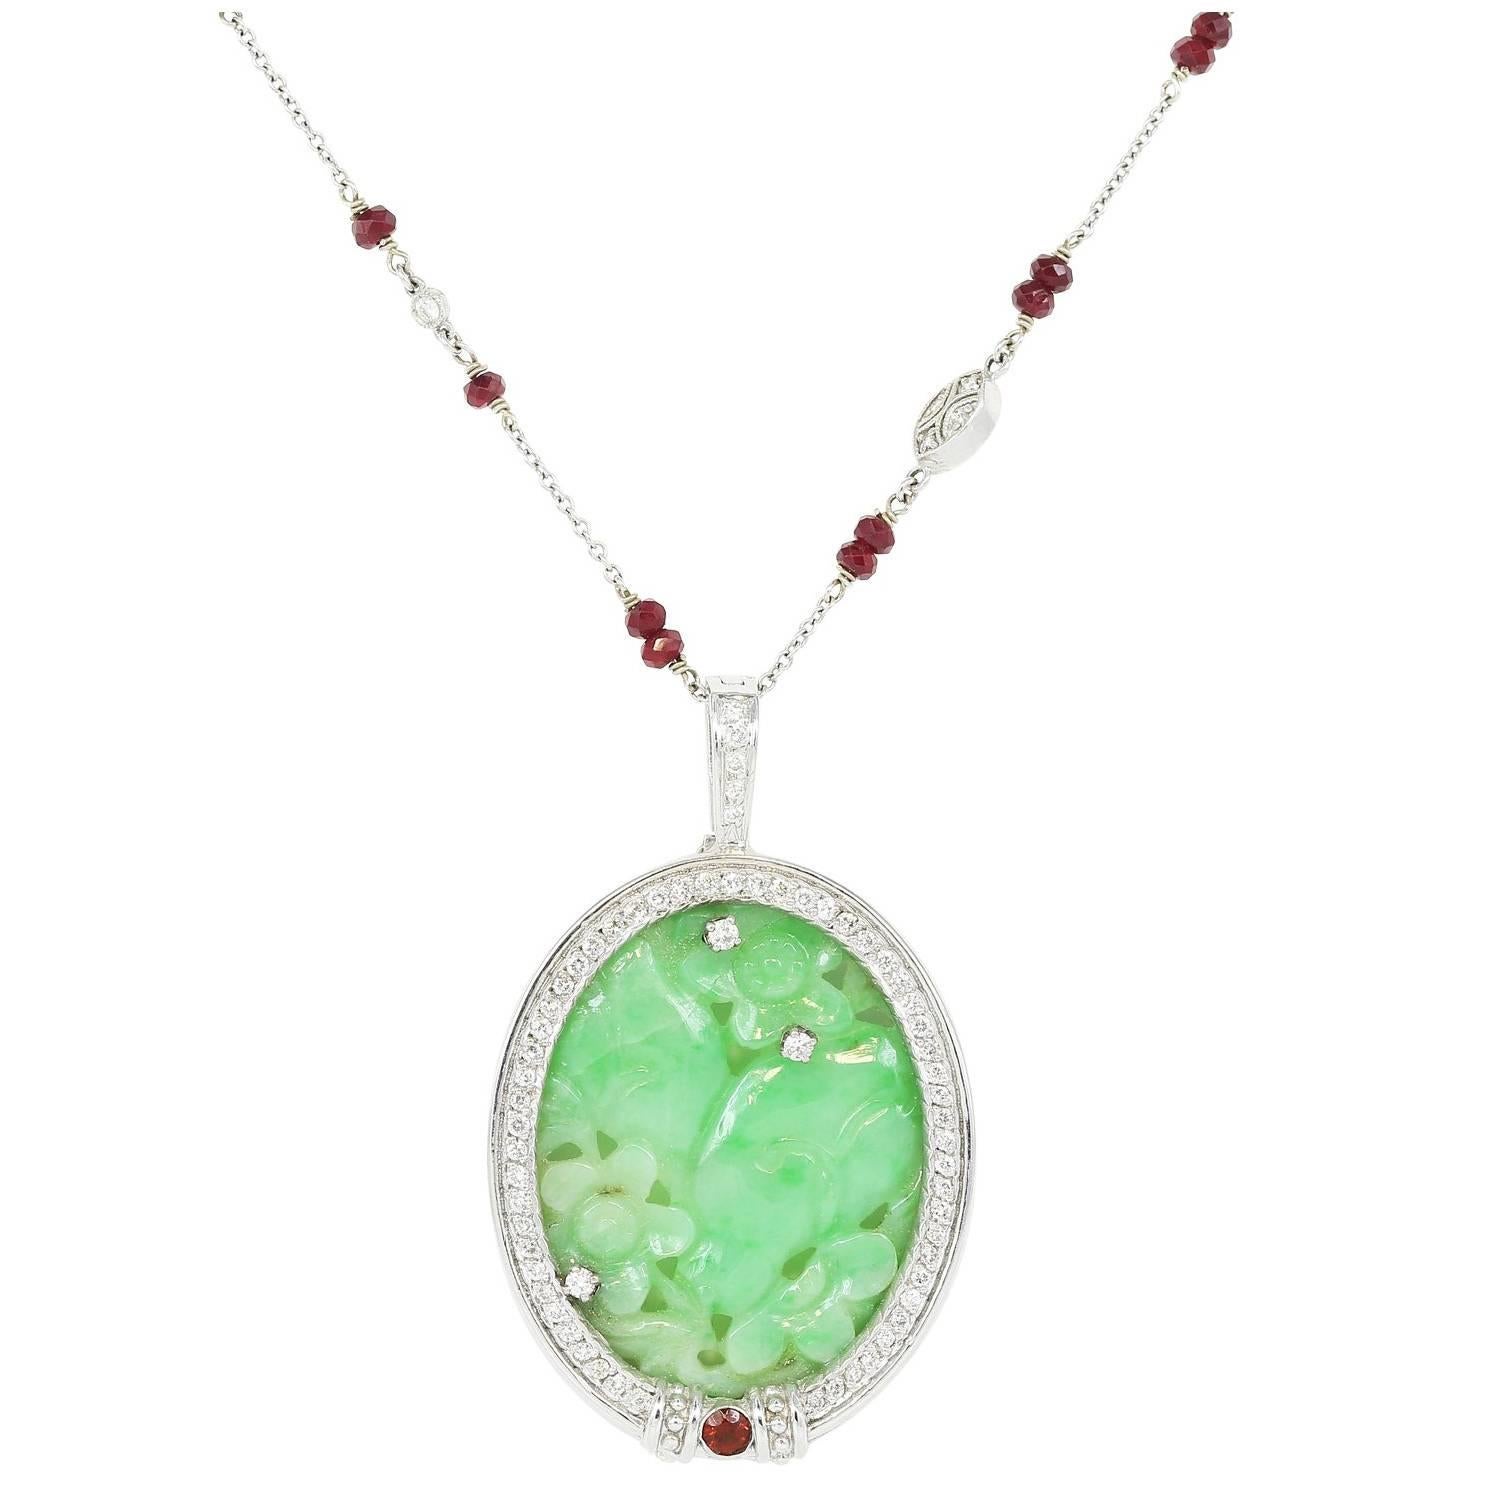 12 Carat Carved Jadeite Jade Pendant with Ruby Chain For Sale